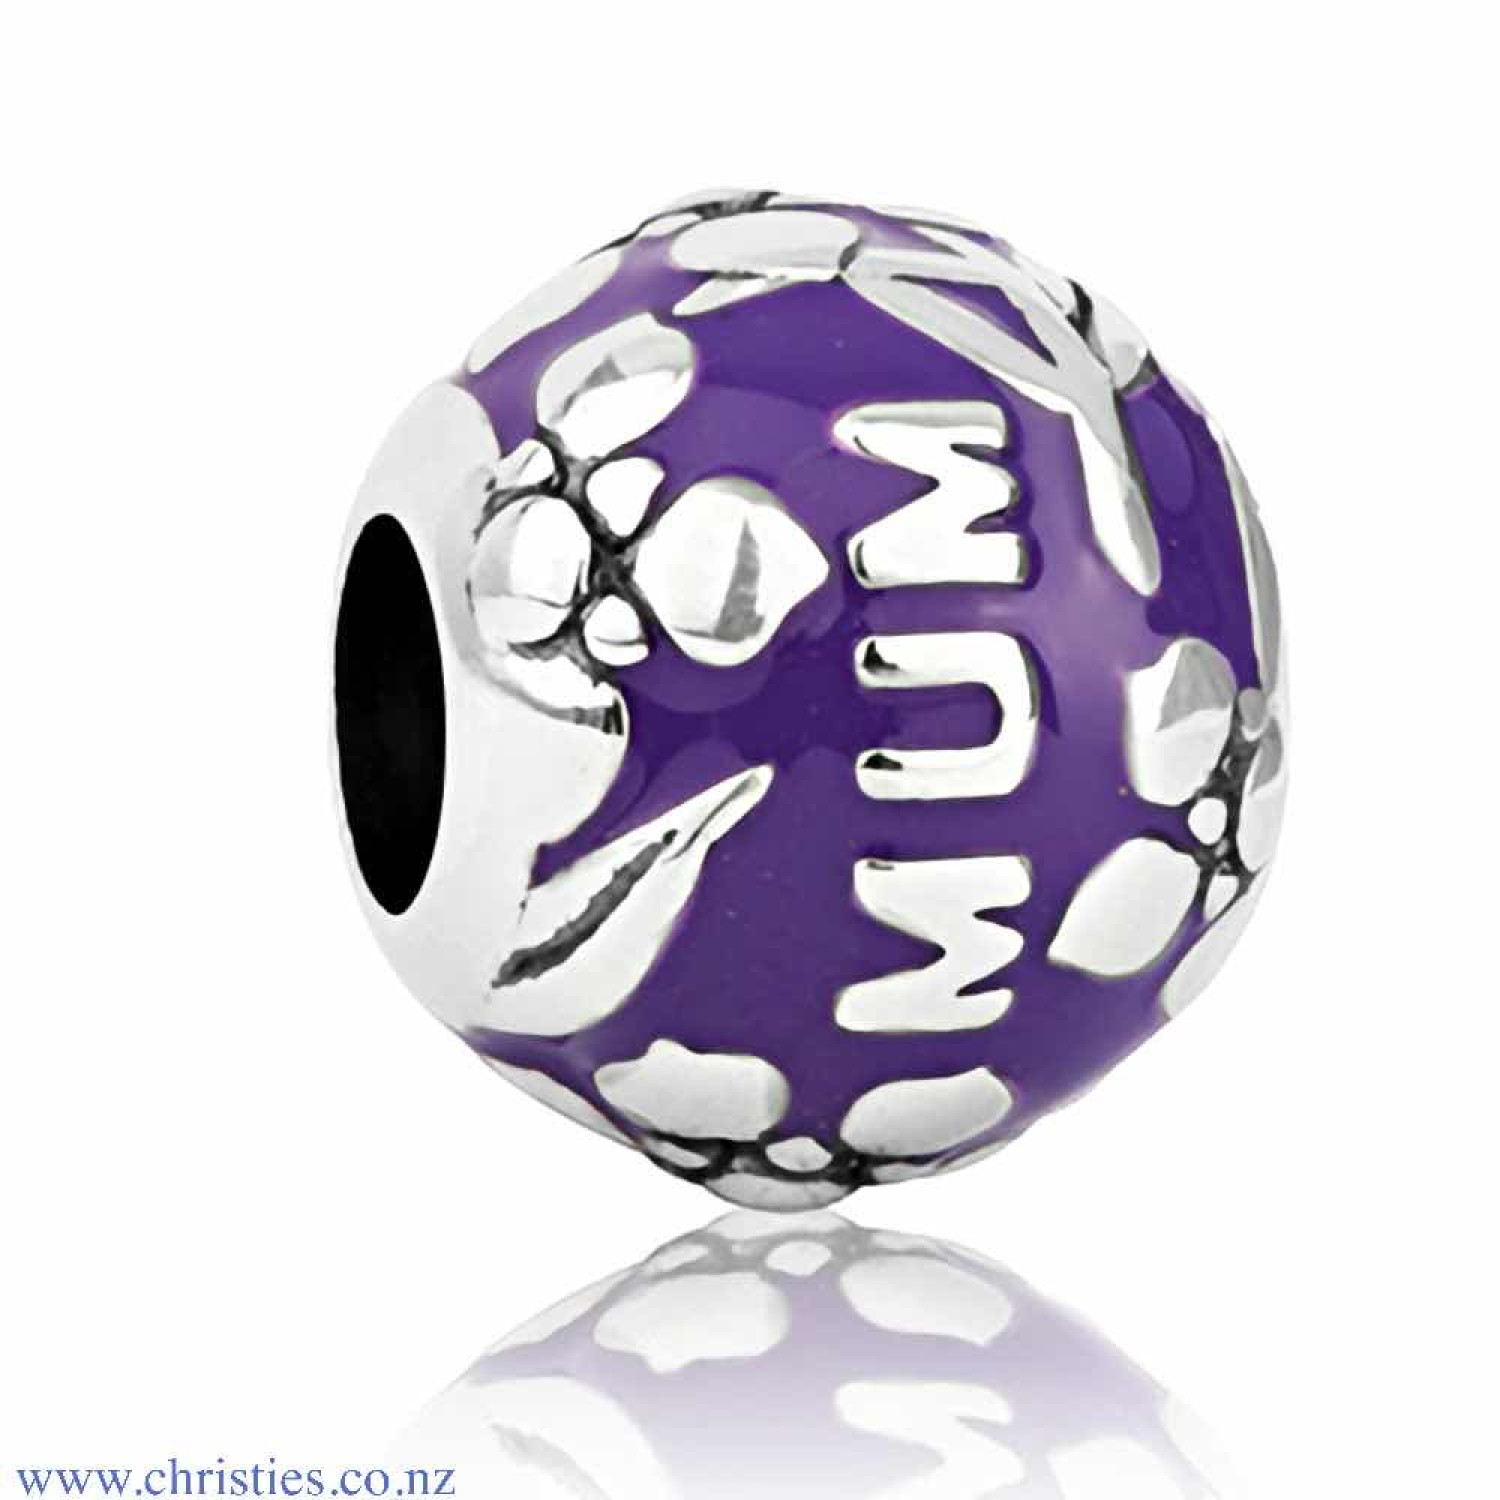 LKE063 Evolve Jewellery Mum Unconditional Love Mulberry Charm. Celebrating the unconditional love that a mother shares with her family, Evolve's precious Mum charm honours a special life- long connection.The delicate floral pattern and the striking enamel